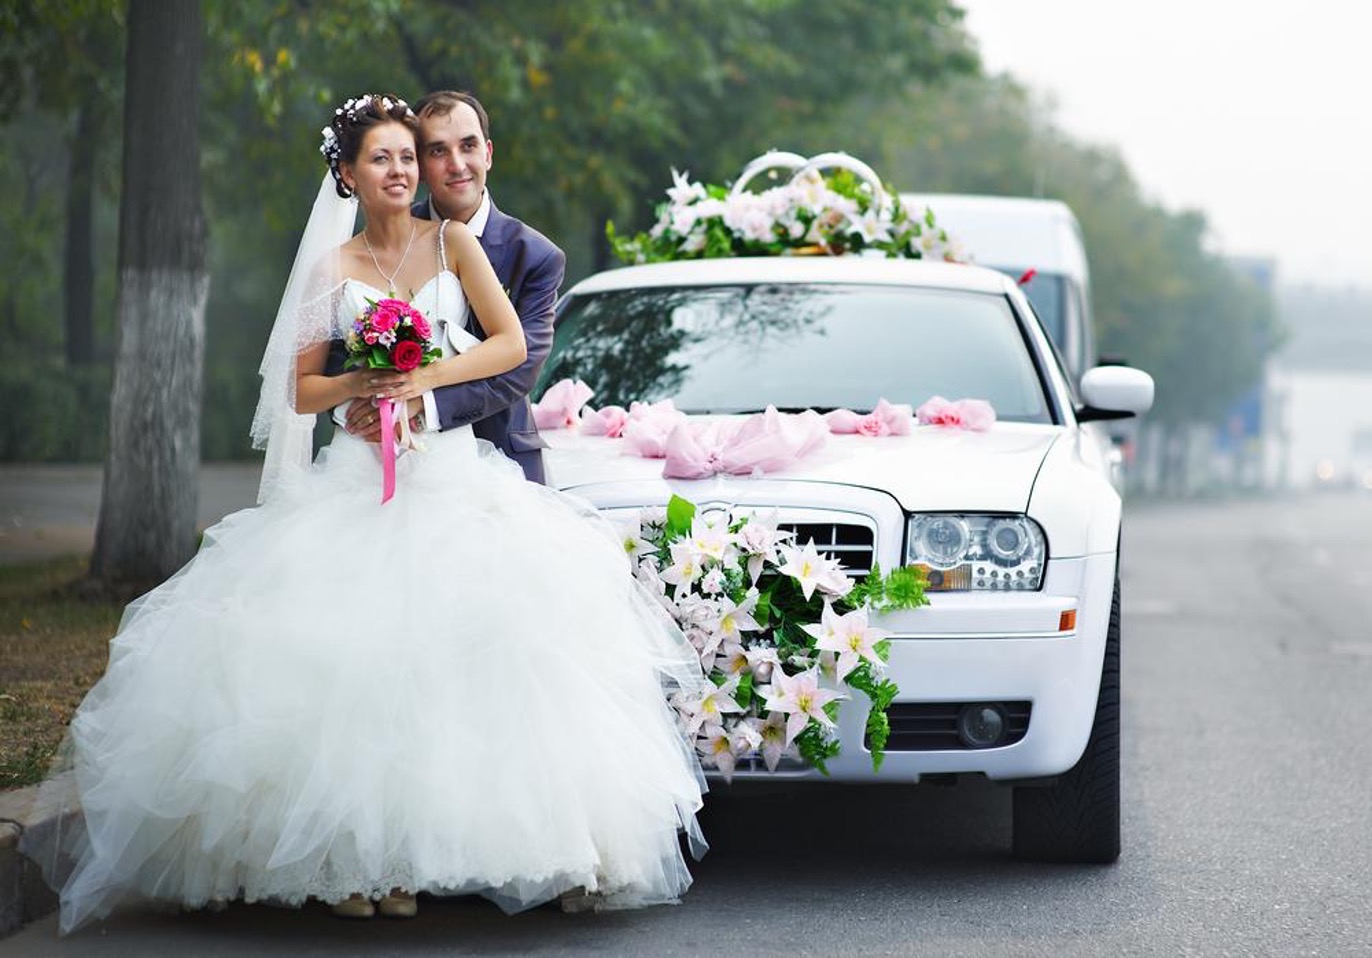 How To Pick The Right Limo For Your Wedding | LaptrinhX / News